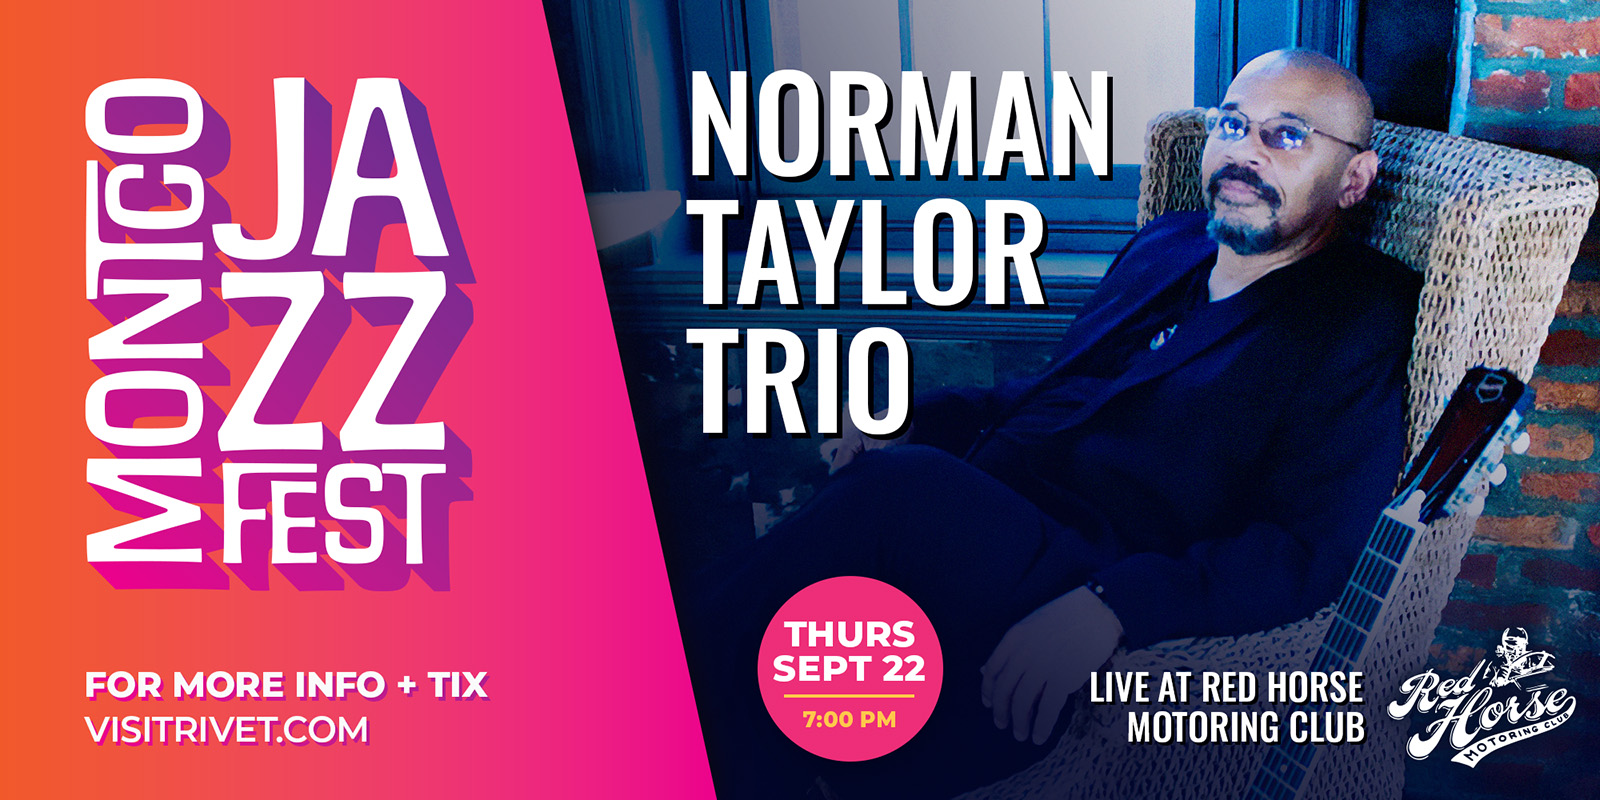 Norman Taylor Trio at Red Horse Motoring Club in Pottstown, Pennsylvania on Thursday, September 22nd, 2022.